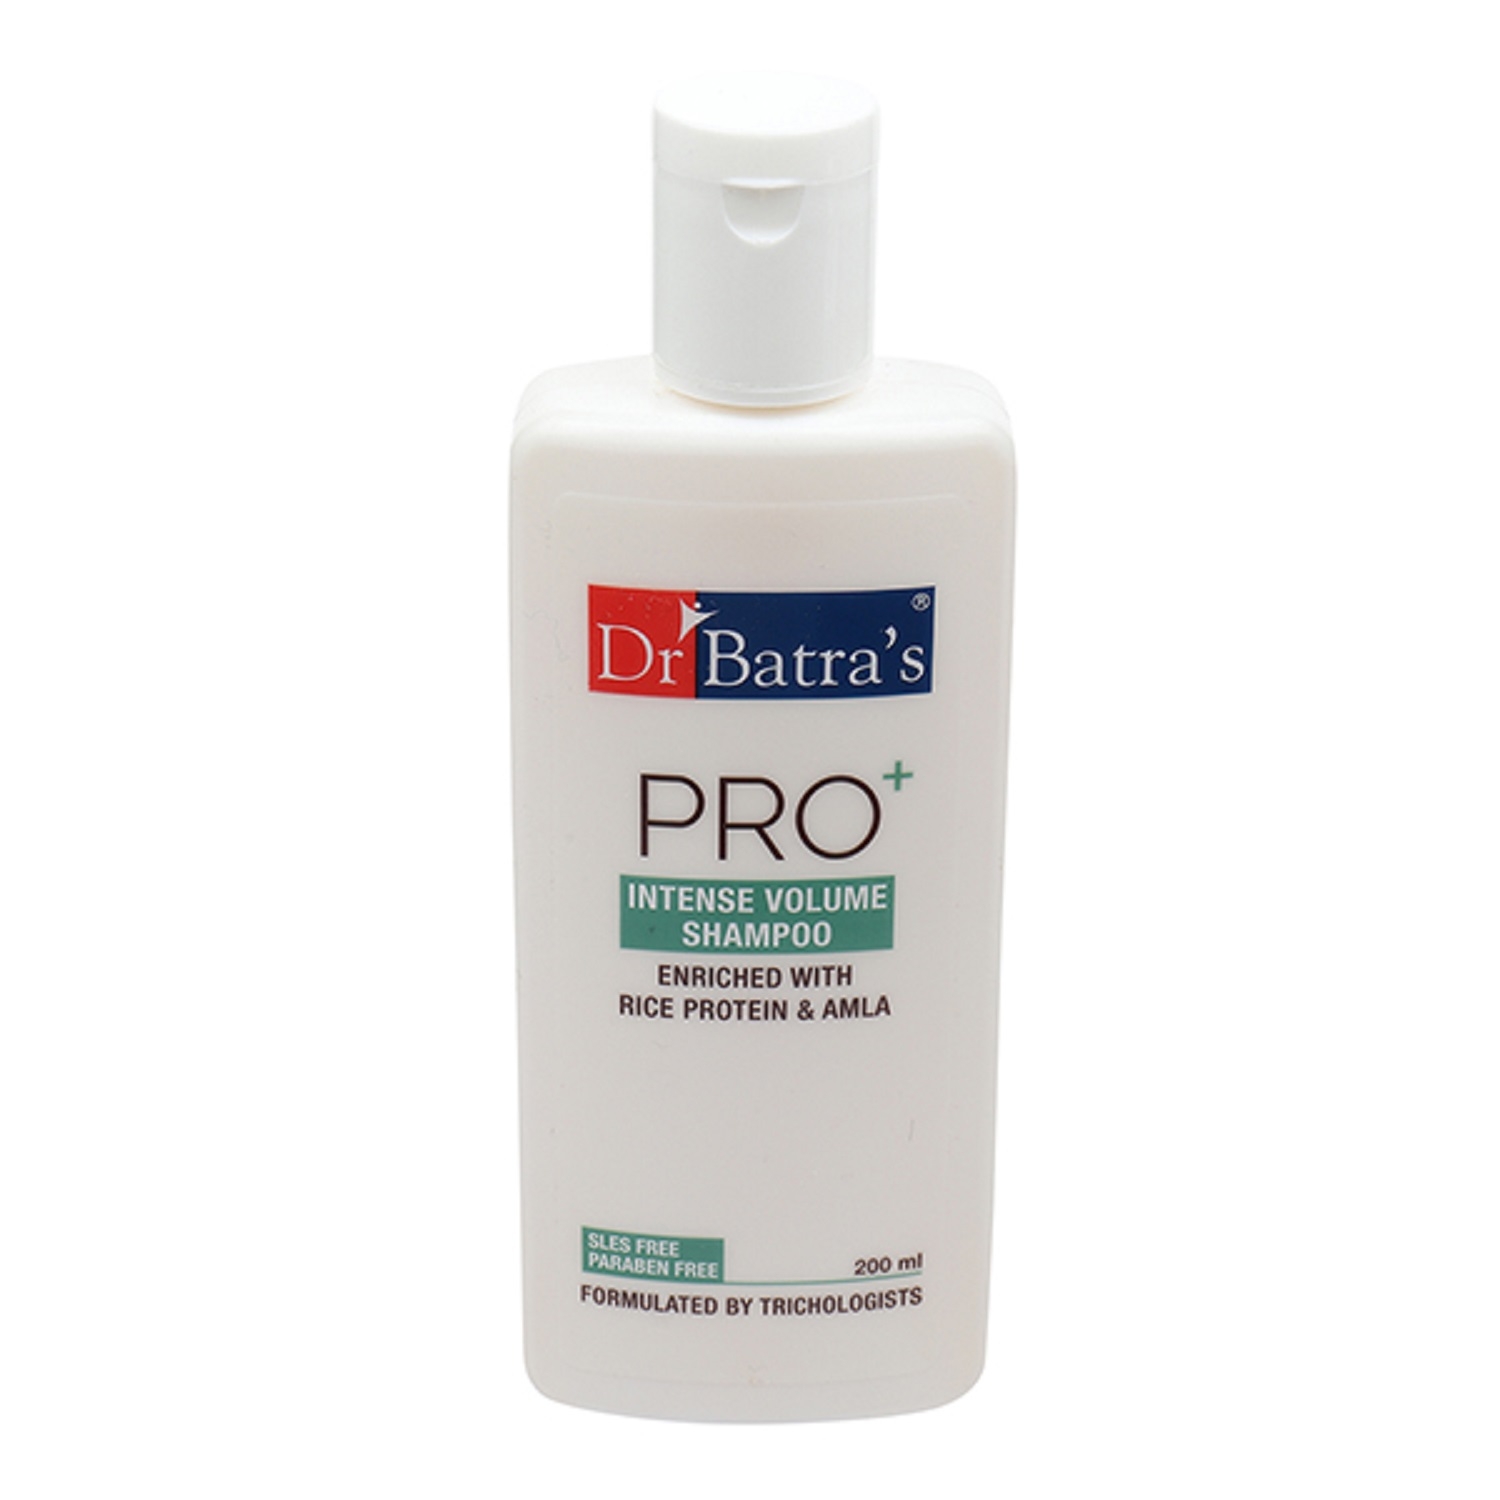 Dr Batra's | Dr Batra's Pro+ Intense Volume Shampoo Enriched With Rice protein & Amla - 200 ml 0